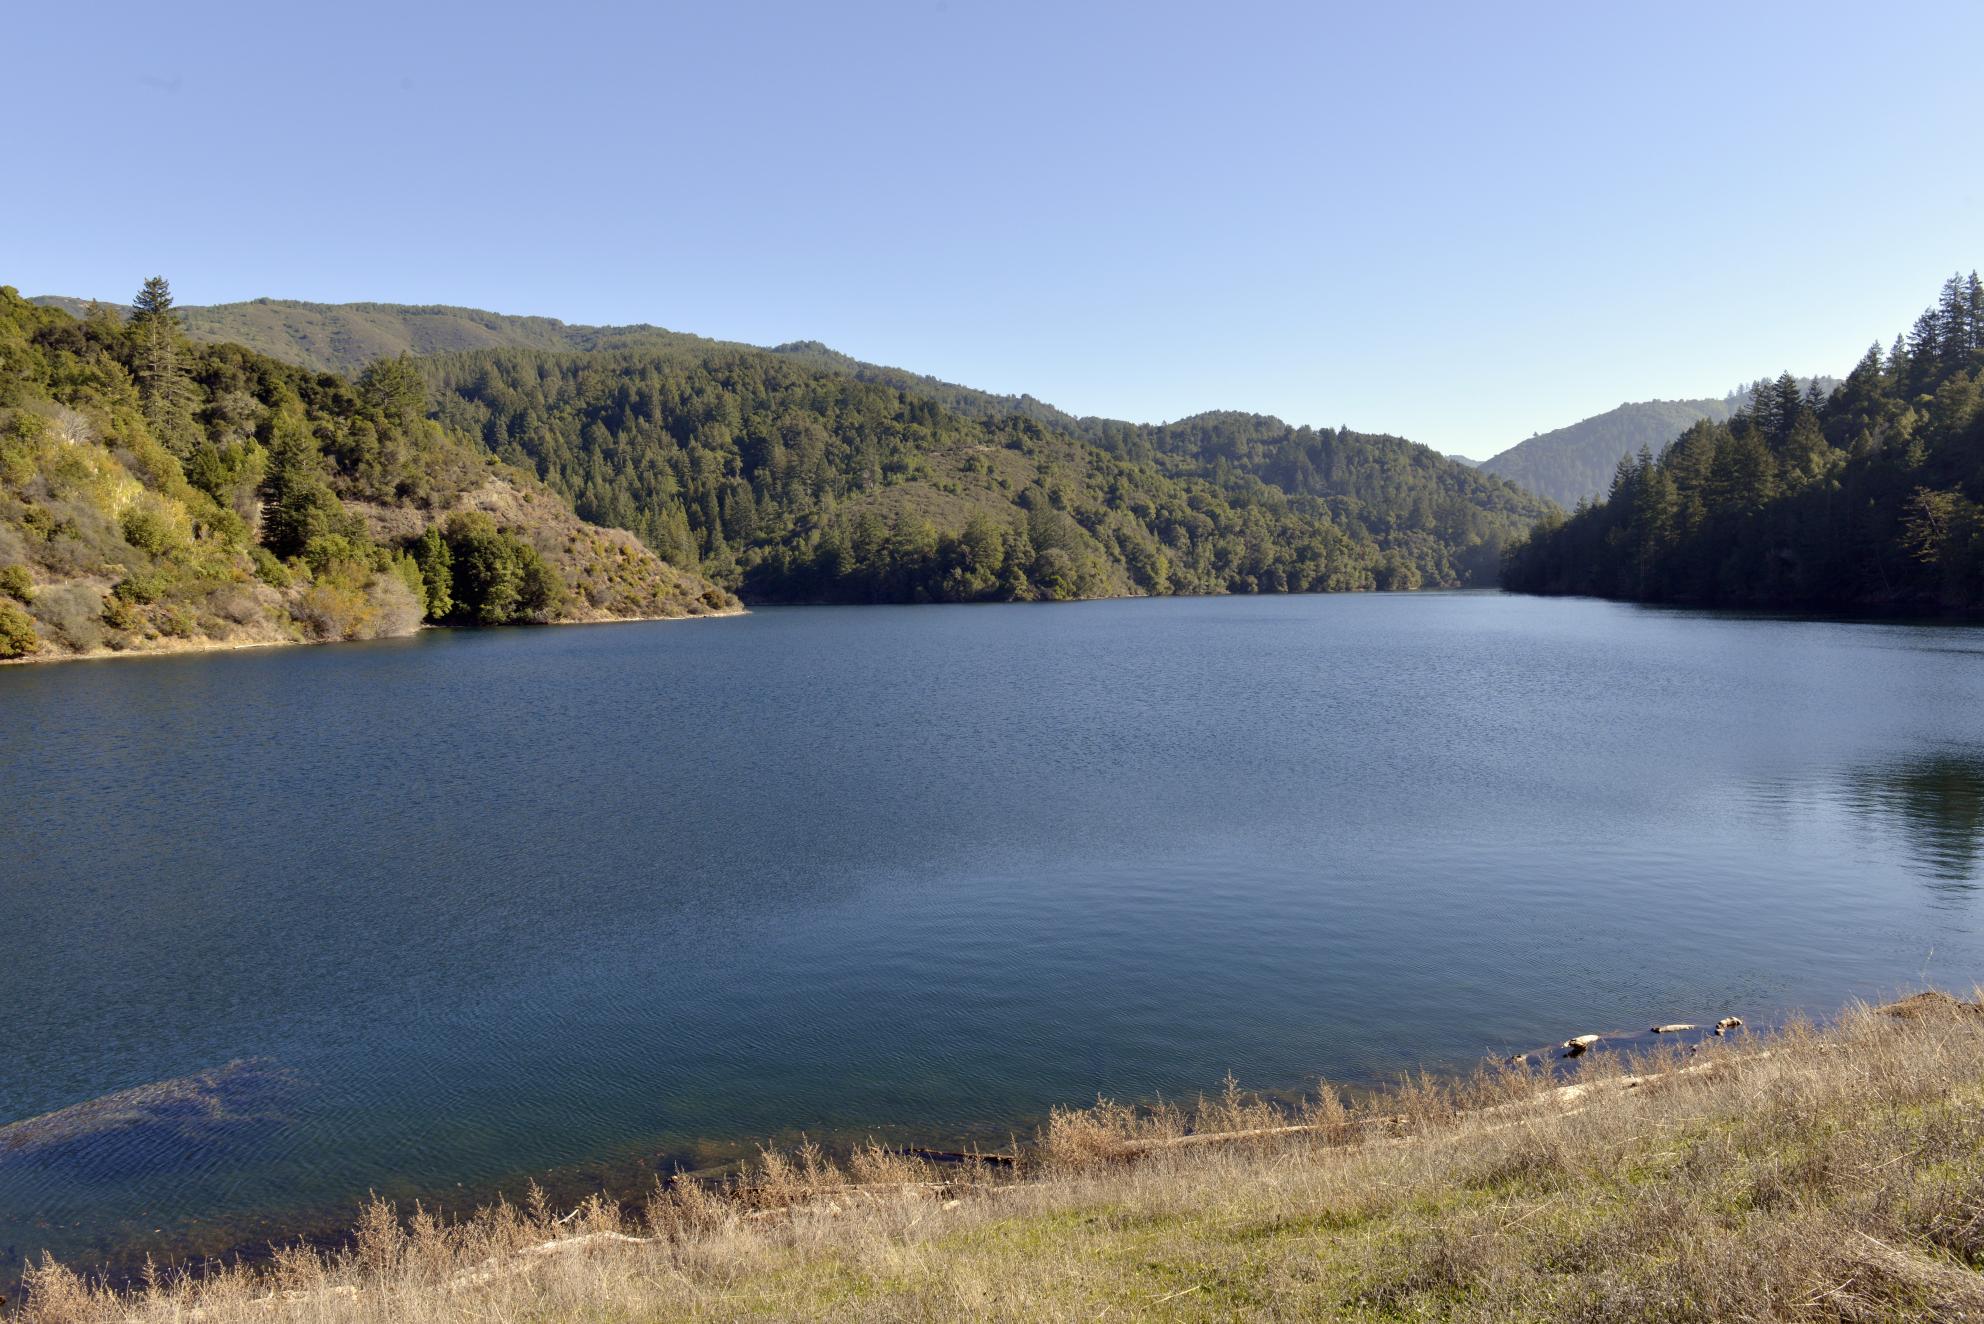 Water in lake with green hills